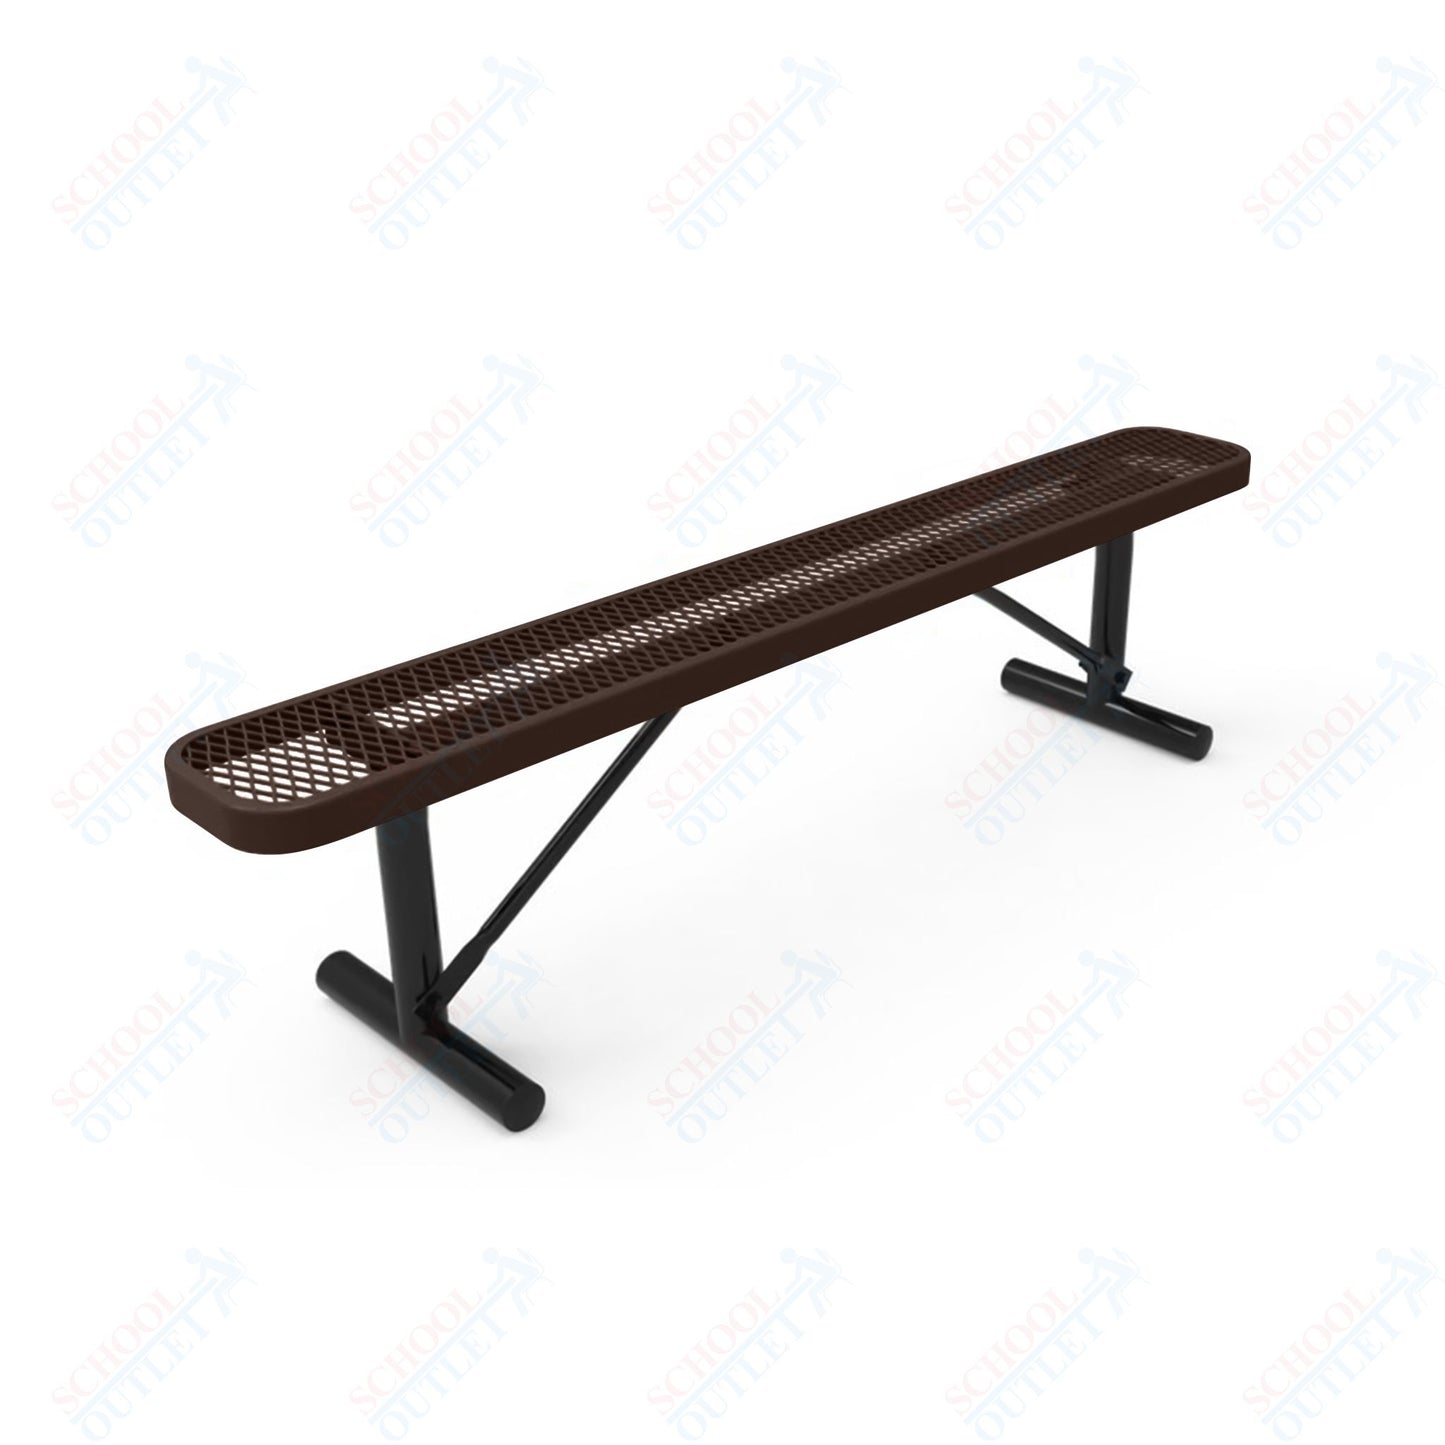 MyTcoat - Standard Portable Outdoor Bench with Back 6' L (MYT-BRT06-21)